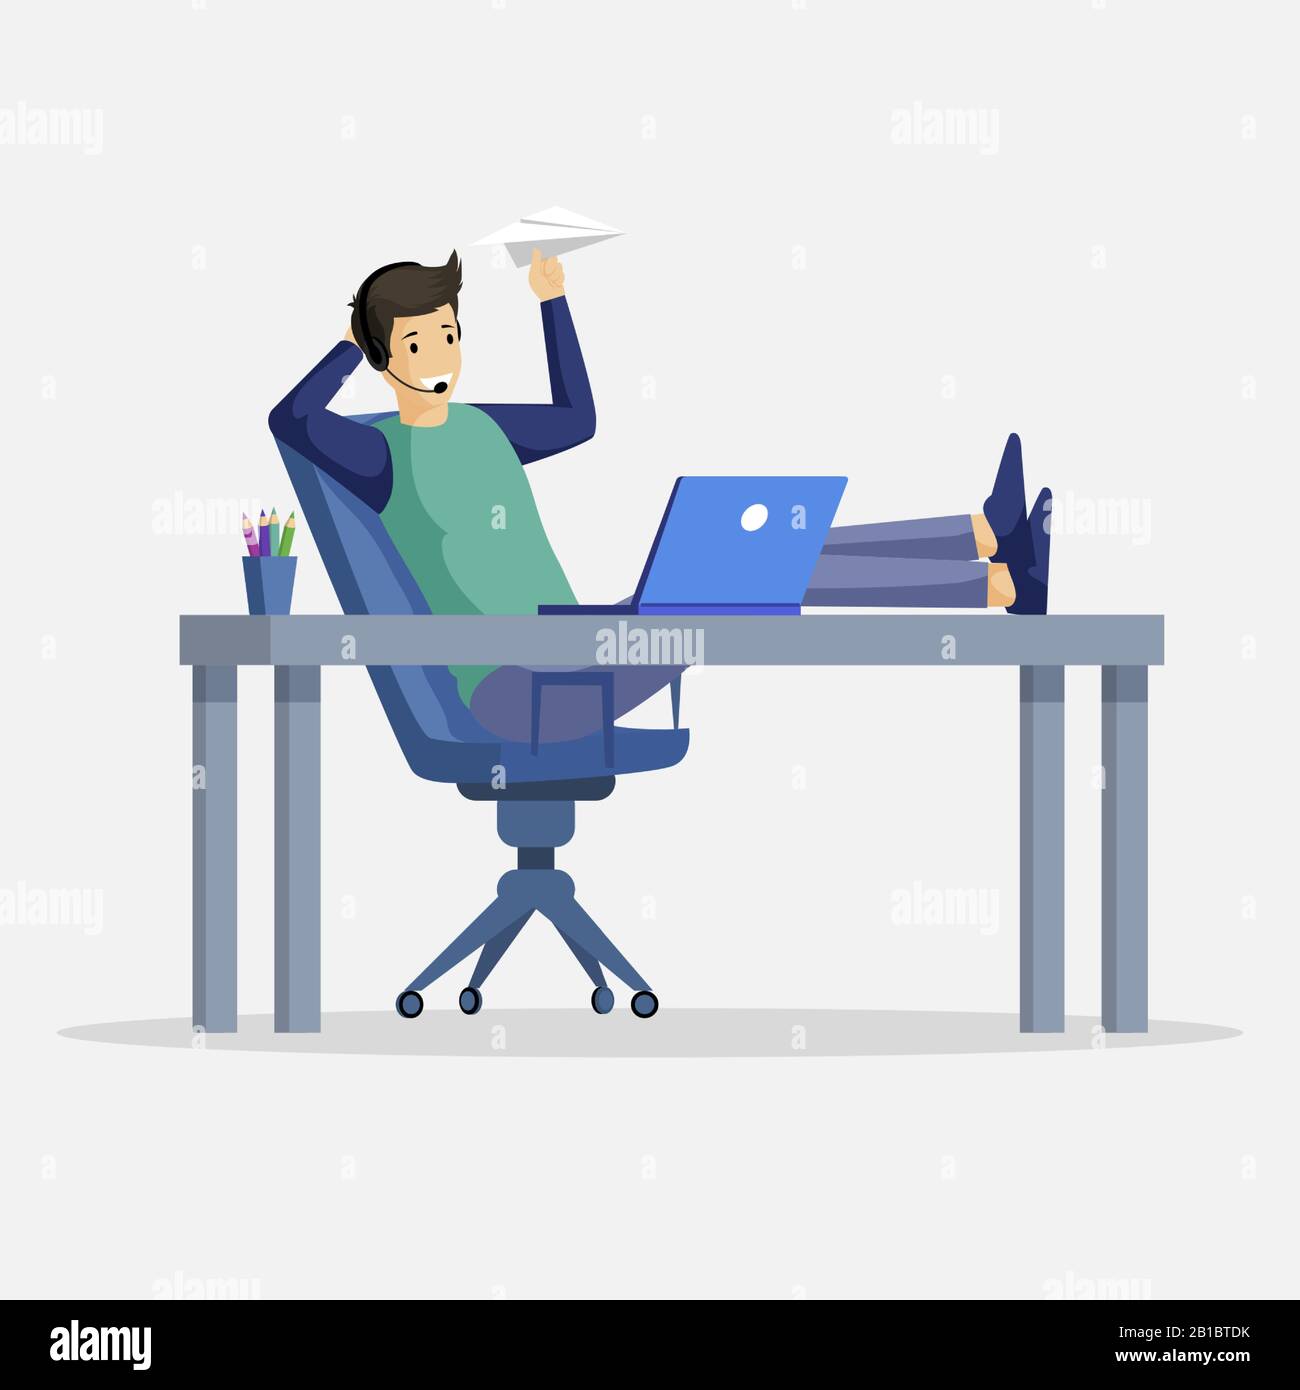 Smiling man sitting at the table and launching paper airplanes vector illustration. Flat character with earpiece and microphone. Freelance, technical support, virtual office, outsourcing concept. Stock Vector